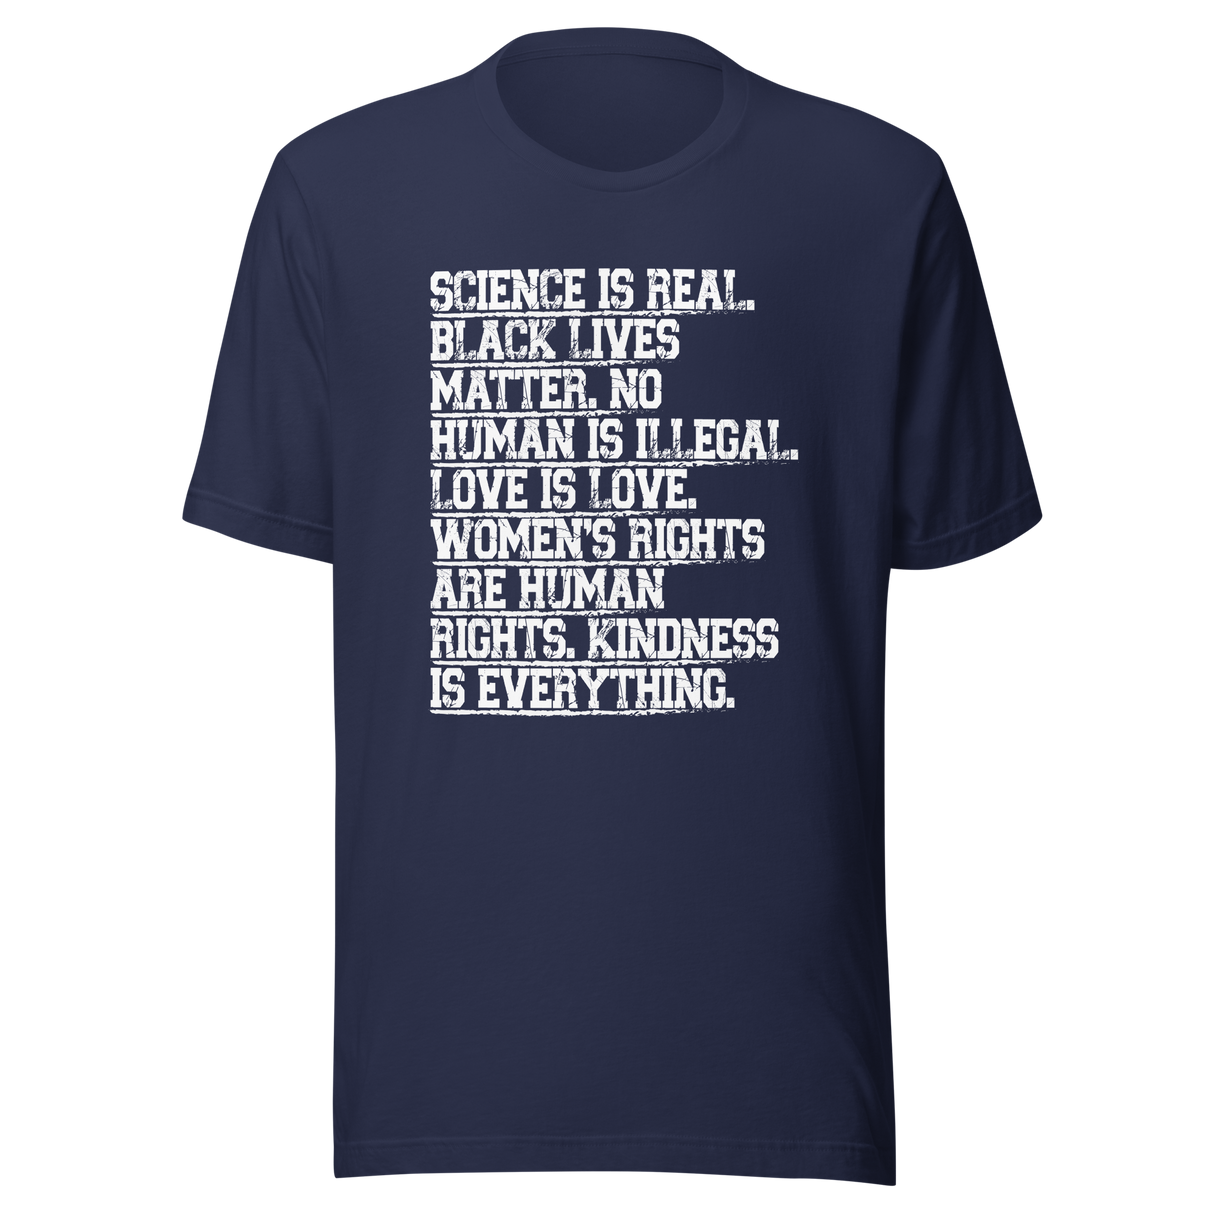 science-is-real-black-lives-matter-no-human-is-illegal-science-tee-real-t-shirt-blm-tee-t-shirt-tee#color_navy